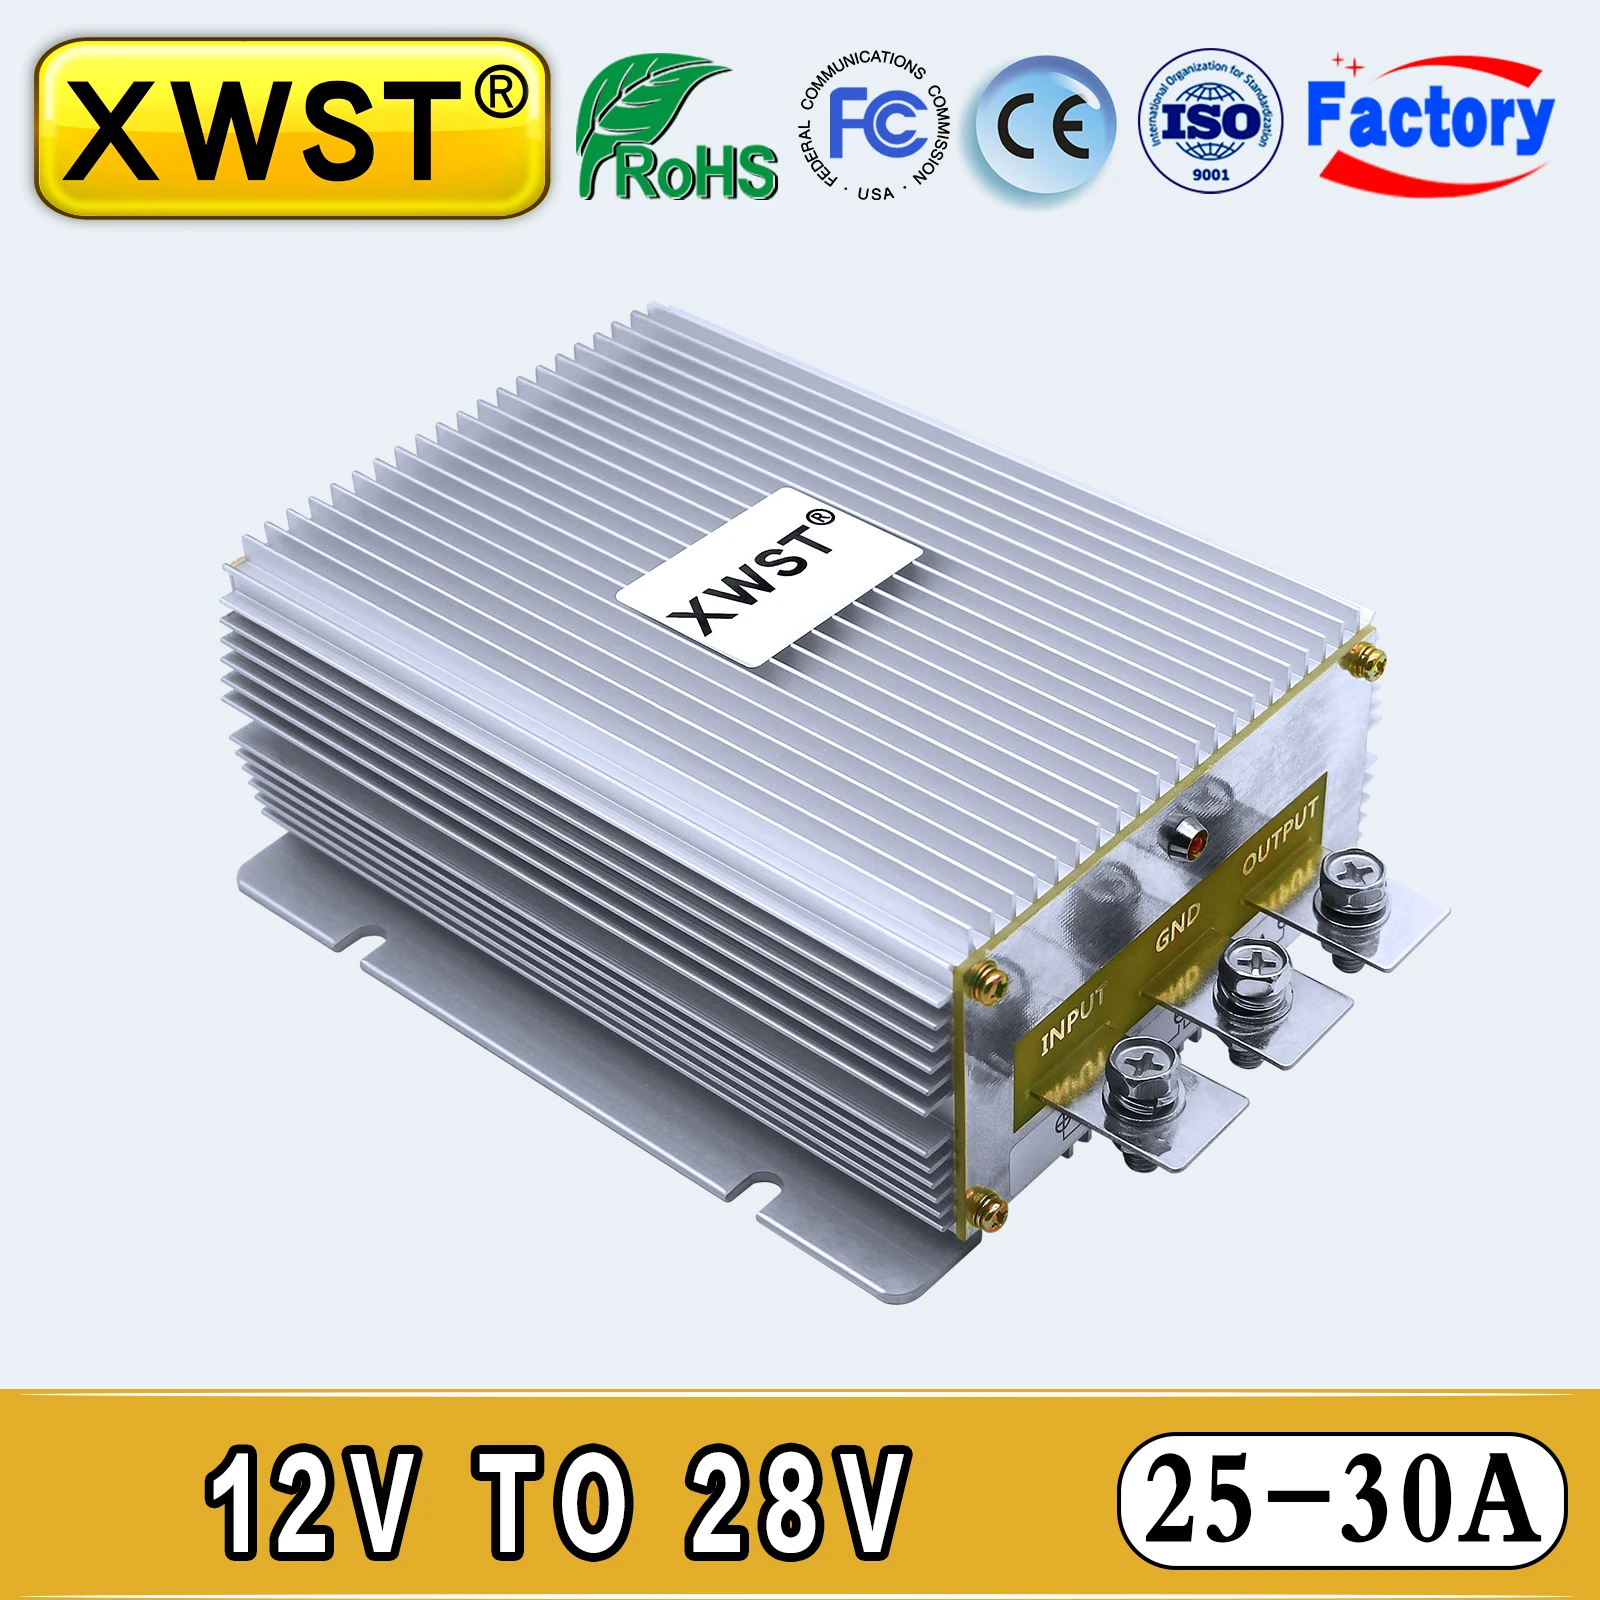 

XWST Car Power Inverter 12V to 28V Step Up DC DC Converter 25A 30A Voltage Regulator Boost Transformer Module Waterproof with CE